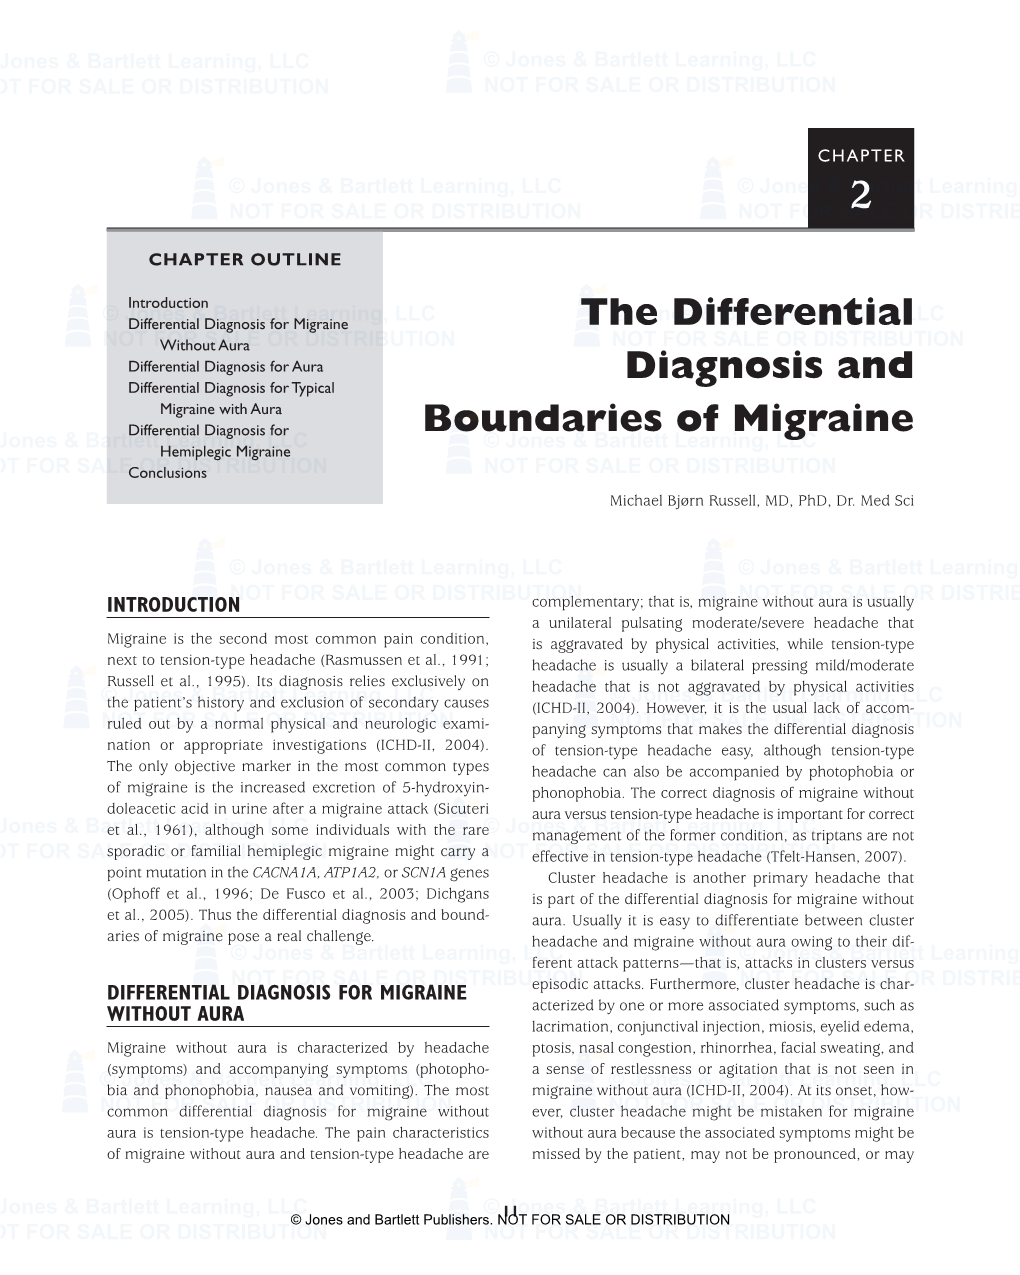 The Differential Diagnosis and Boundaries of Migraine